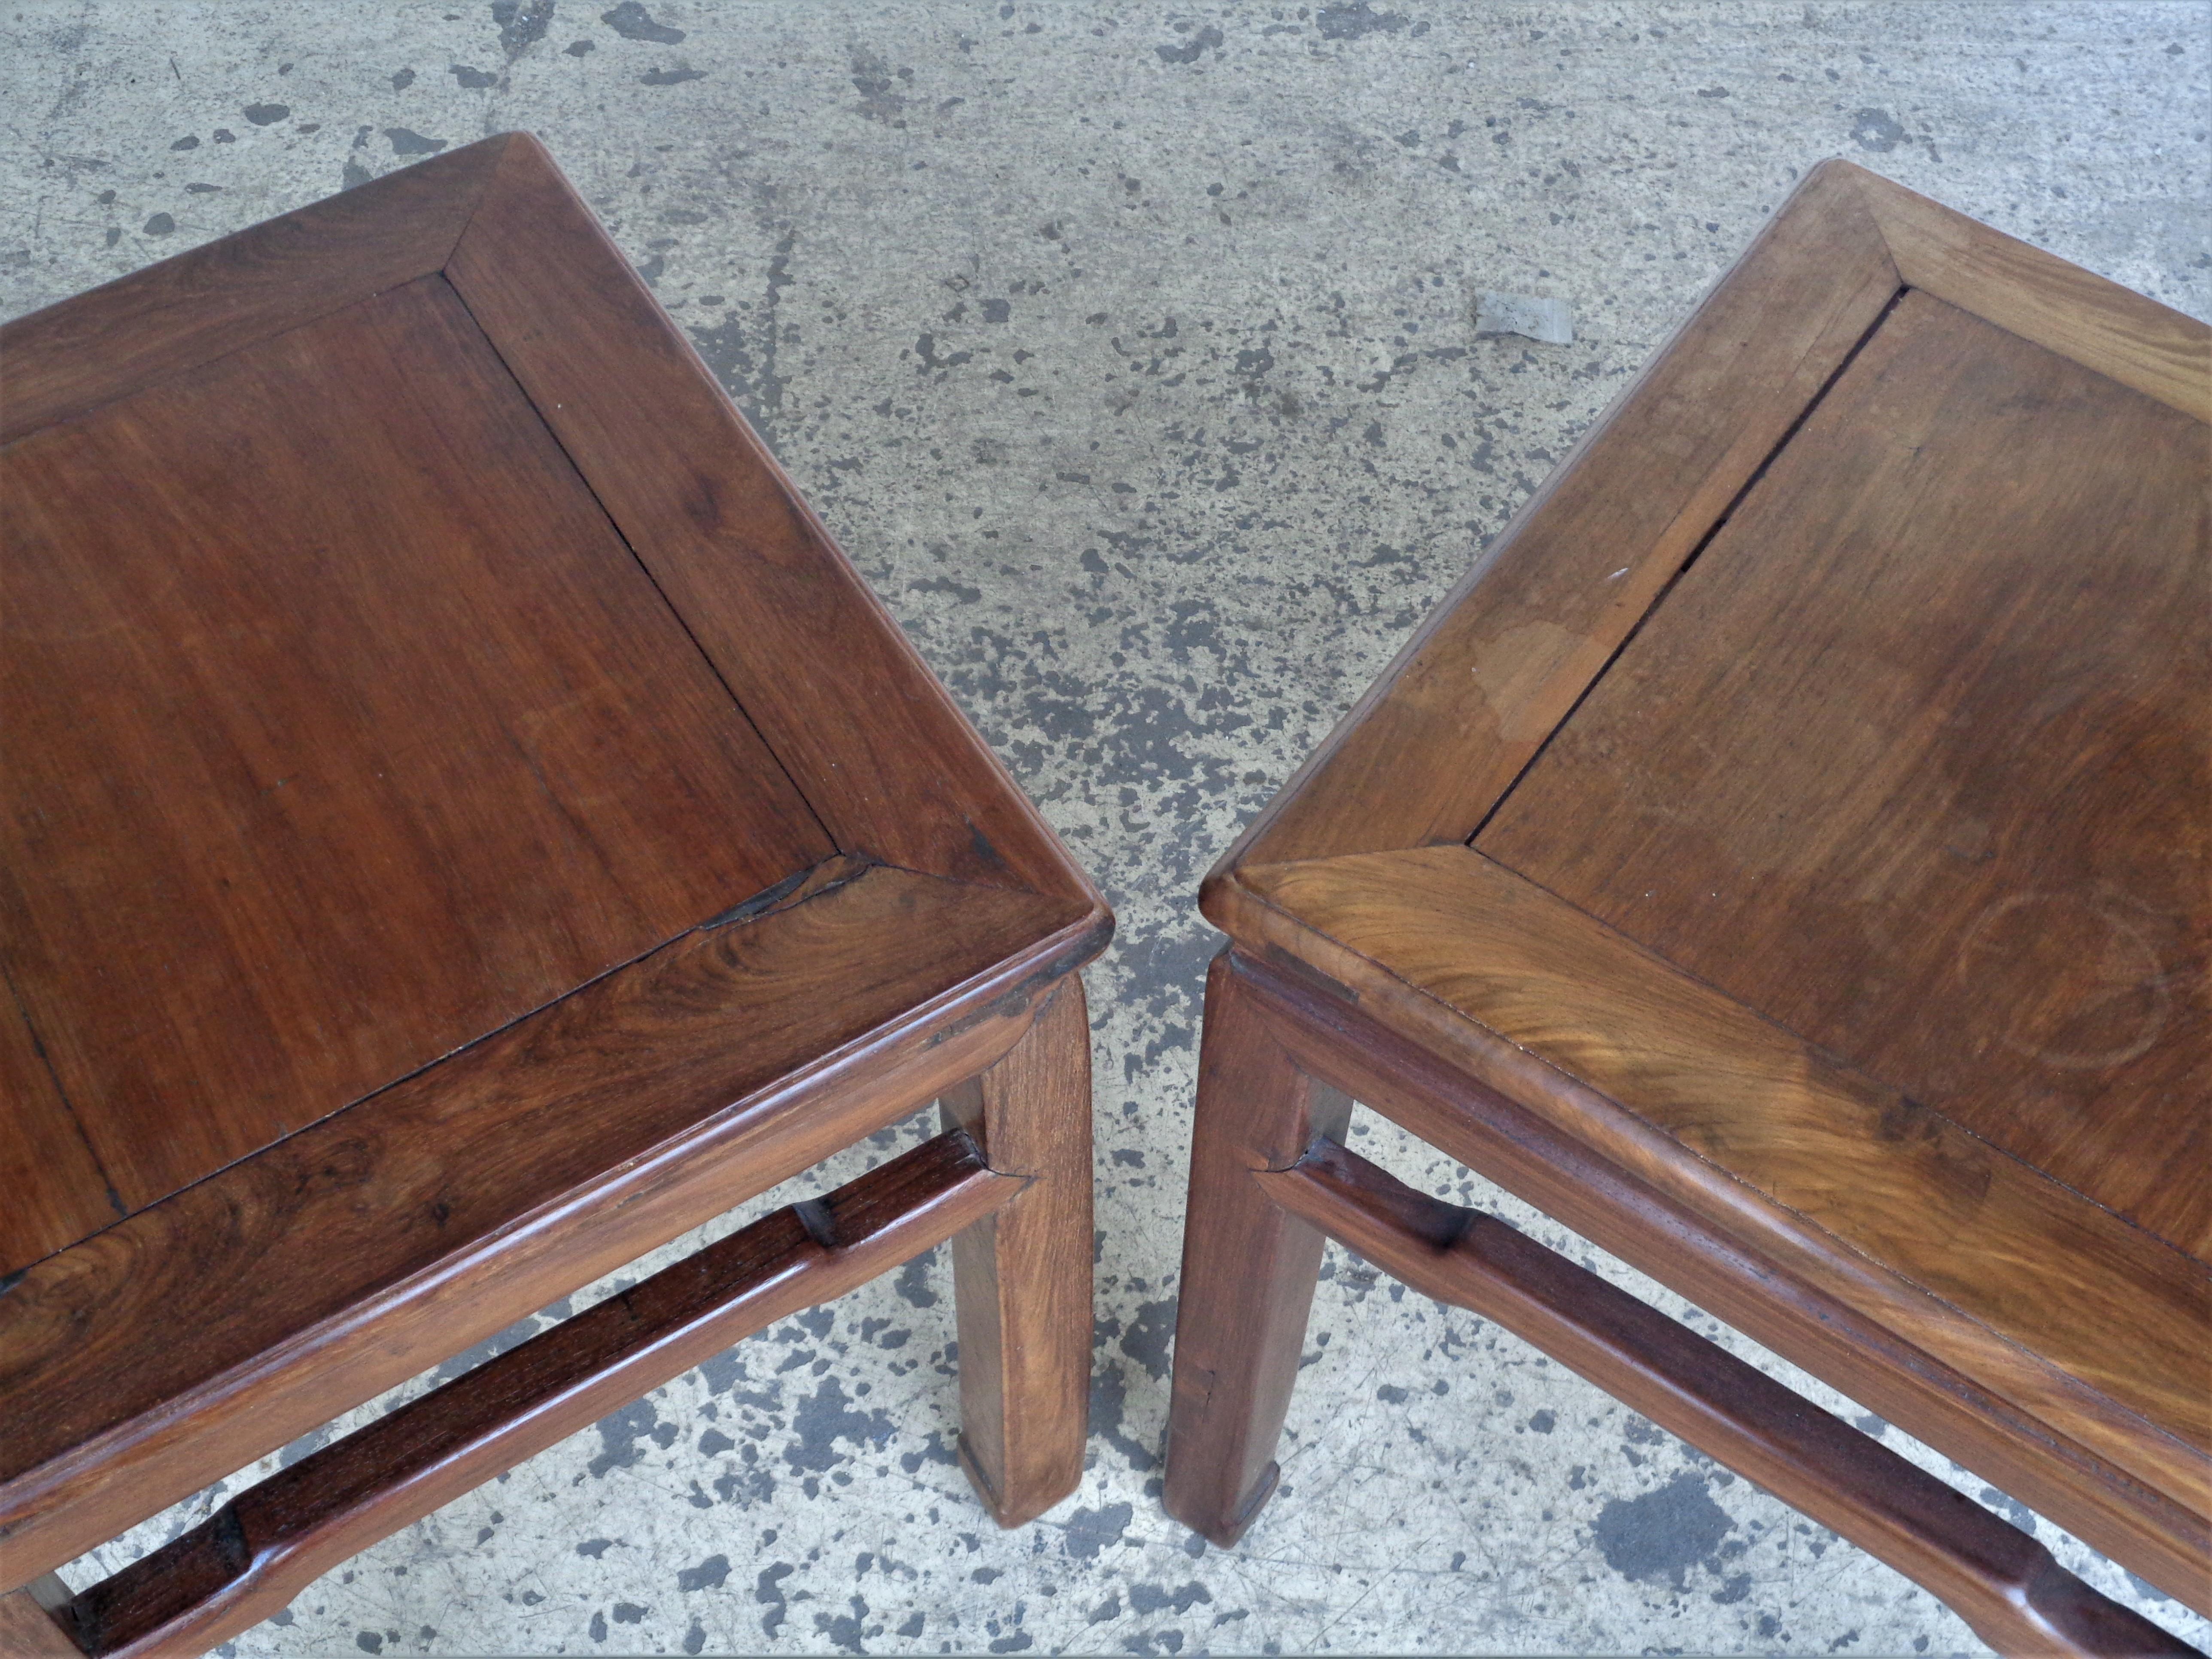 Hand-Carved 19th C. Chinese Hardwood Square Stools / Tables